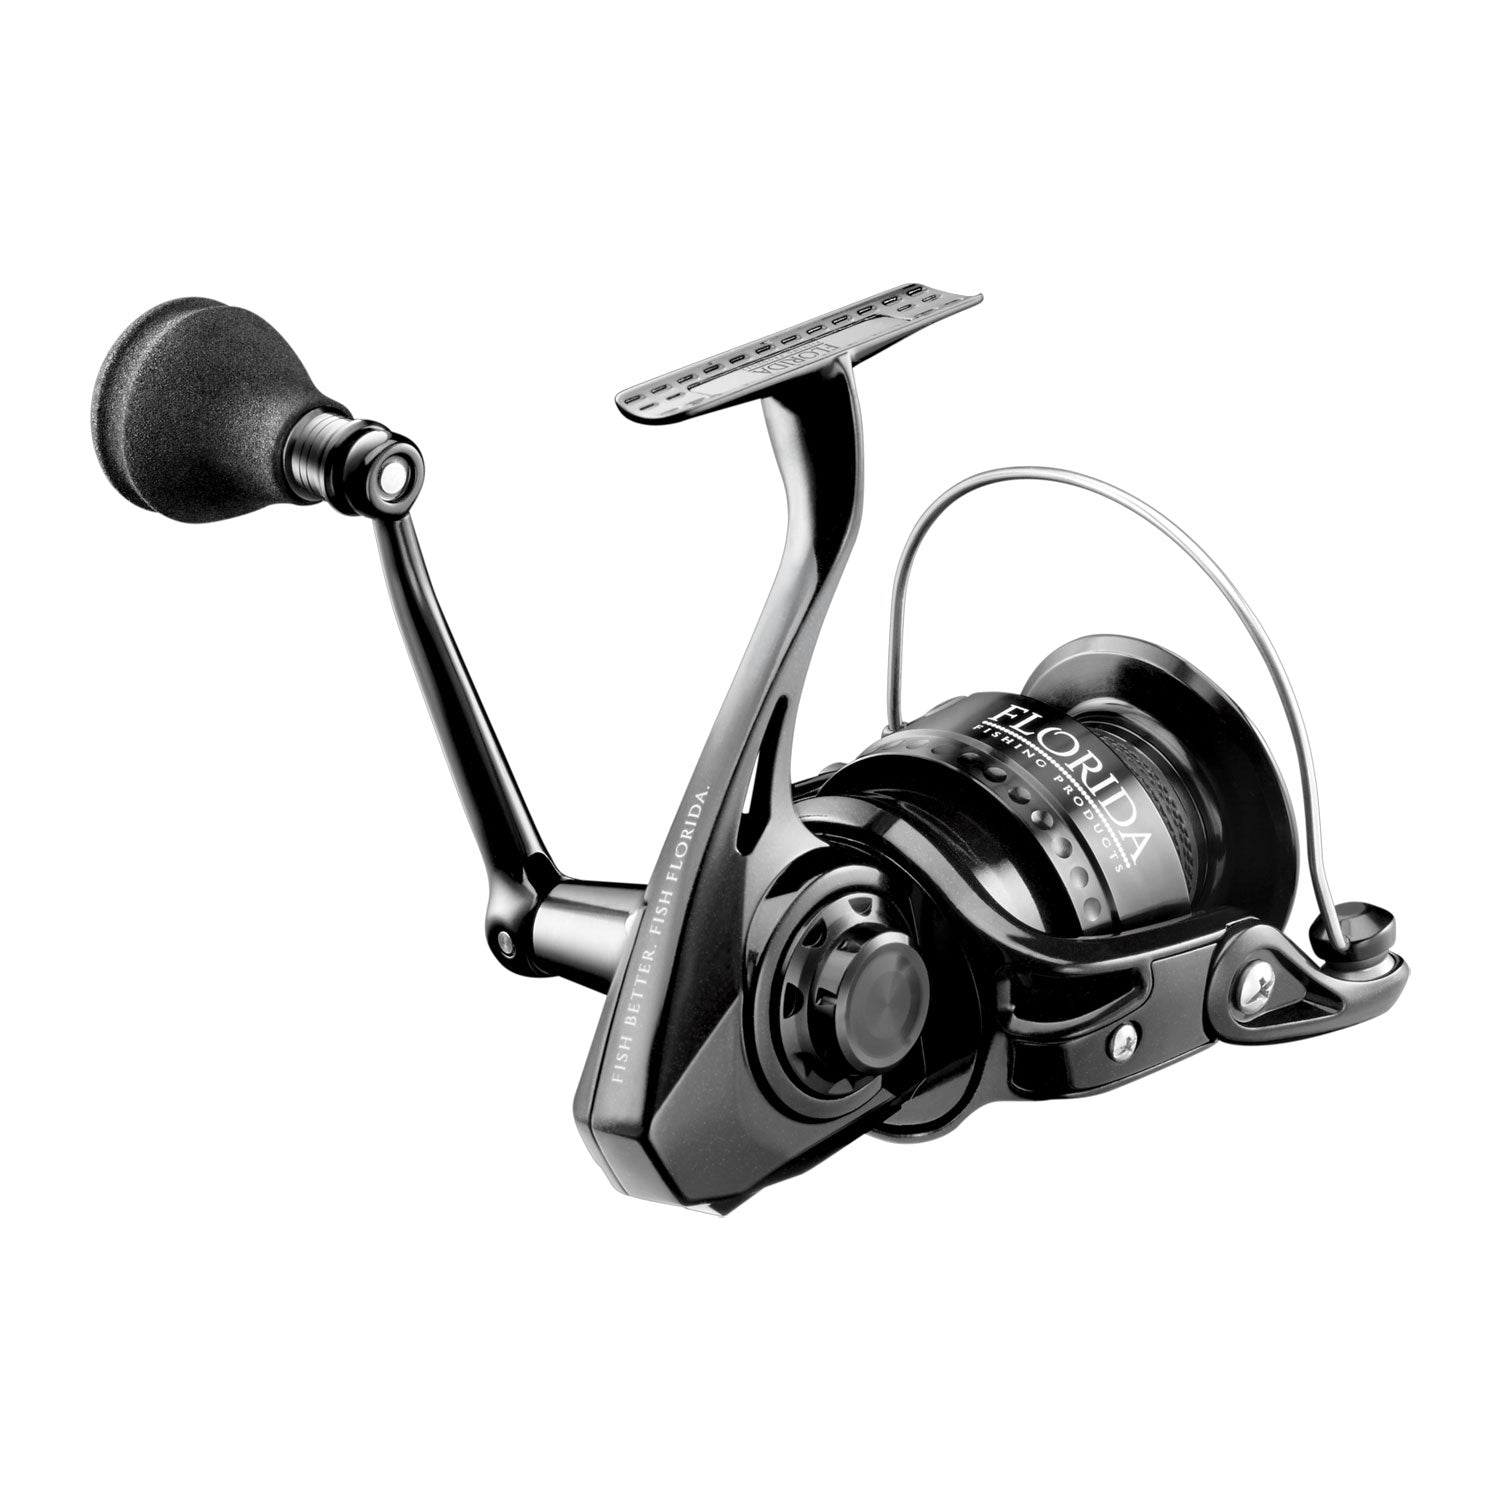 Osprey 4000 Saltwater series spinning reel by Florida Fishing Products-  FFP, 10 month REVIEW!!! 